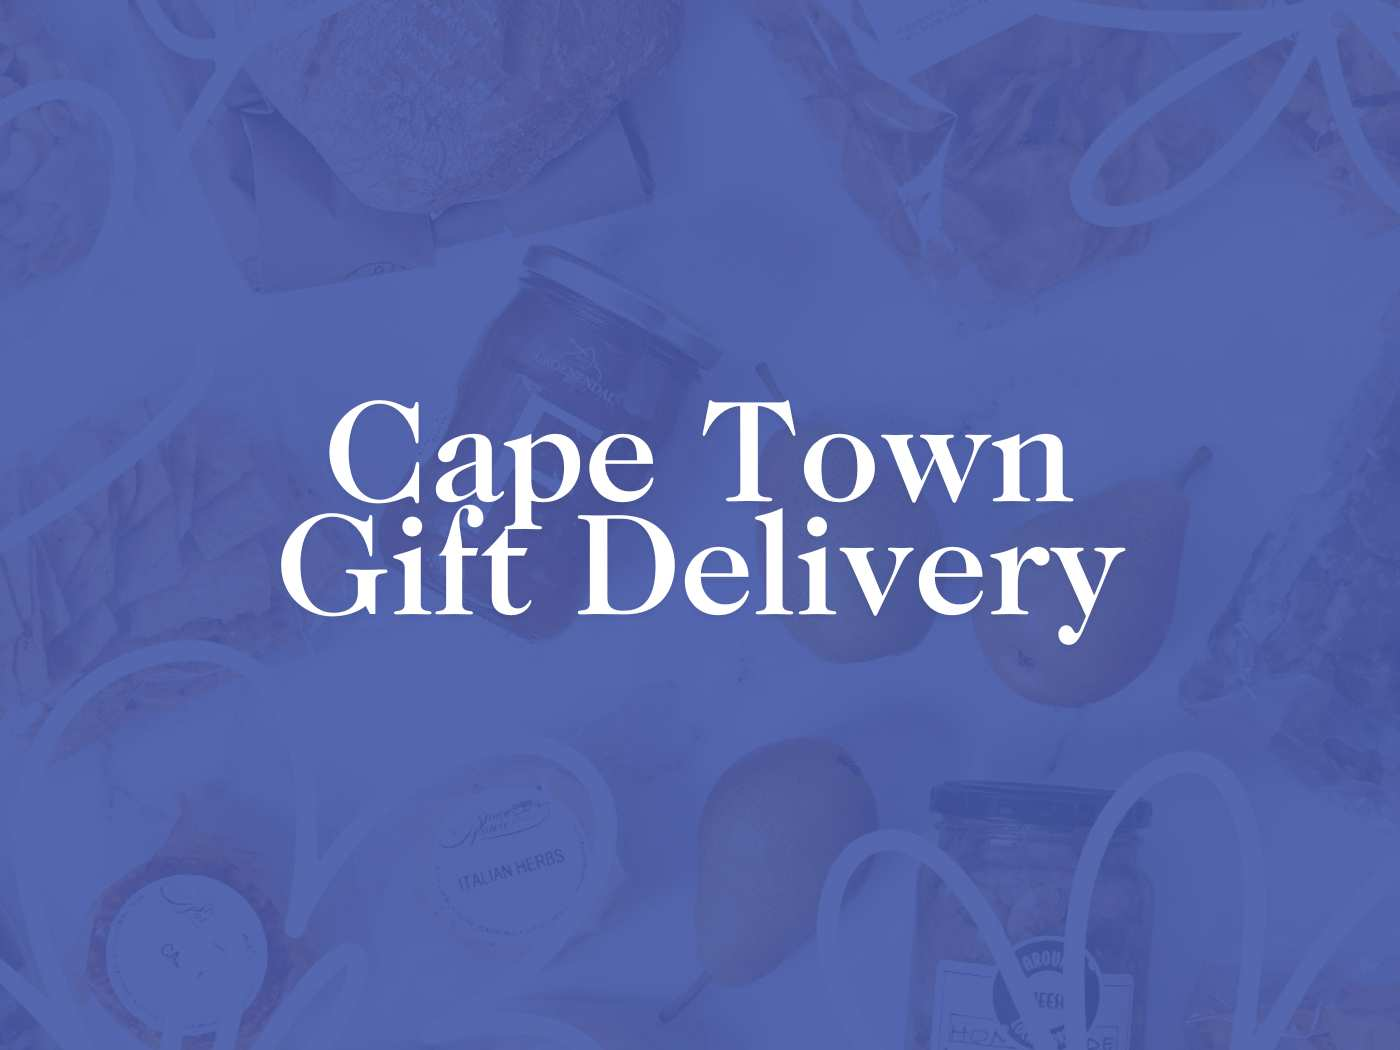 Promotional image for Cape Town Gift Delivery service, offering thoughtful and exquisite gifting options, provided by Fabulous Flowers and Gifts.